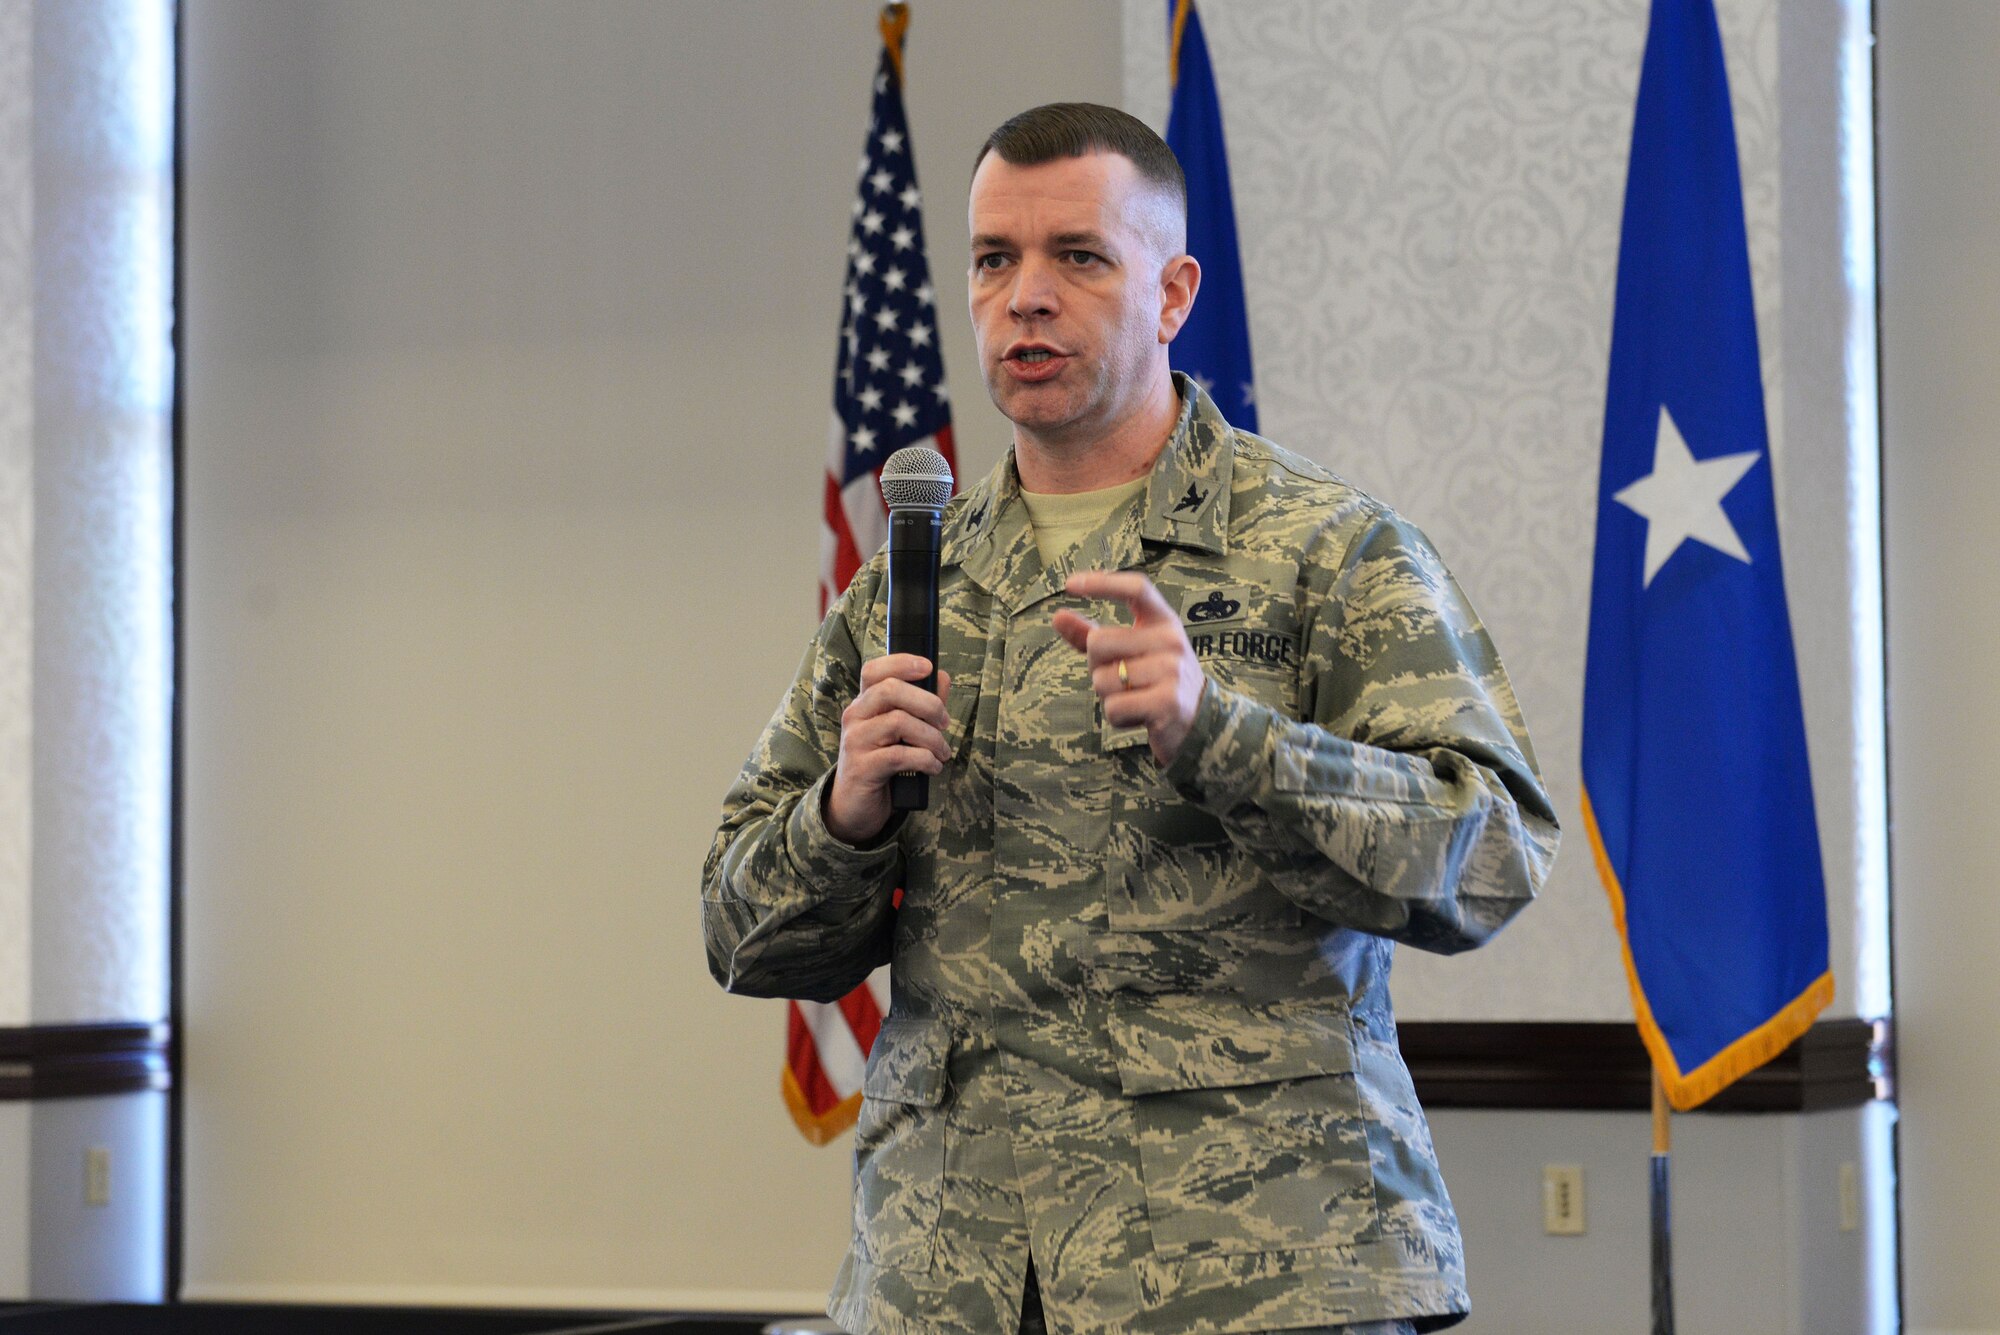 Col. David Sanford, 635th Supply Chain Operations Wing commander, answers questions during a logistics summit at Scott Air Force Base March 22.  The two-day summit brought around 200 logistics commanders and senior leaders from all over the world together to work on  better ways to improve current ways of operations. (U.S. Air Force photo by Tech. Sgt. Maria Castle)